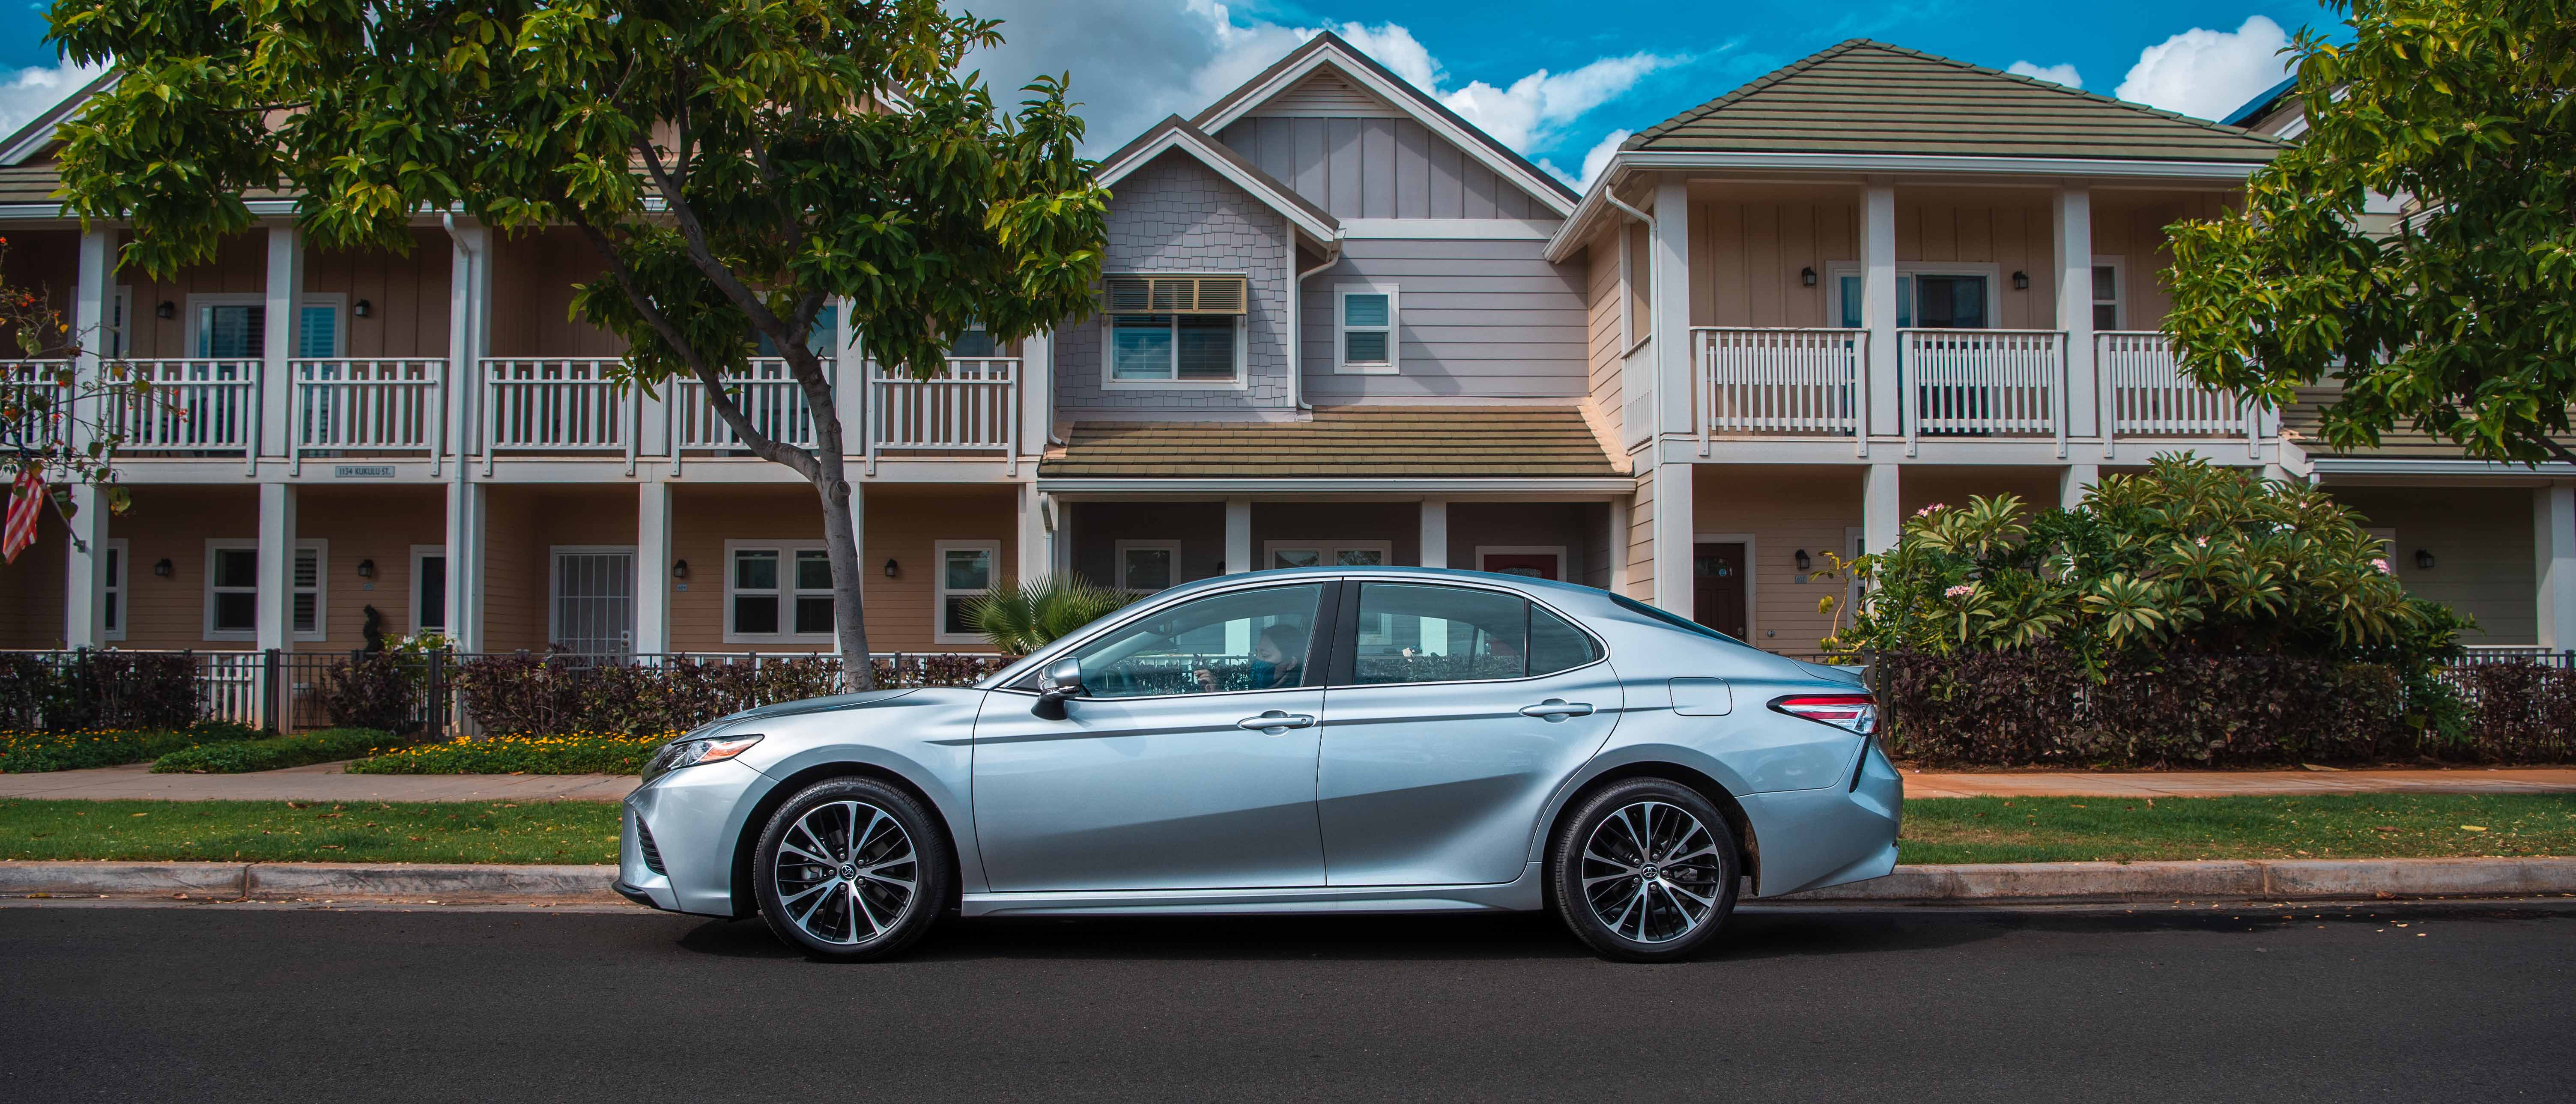 Sell your car in Honolulu